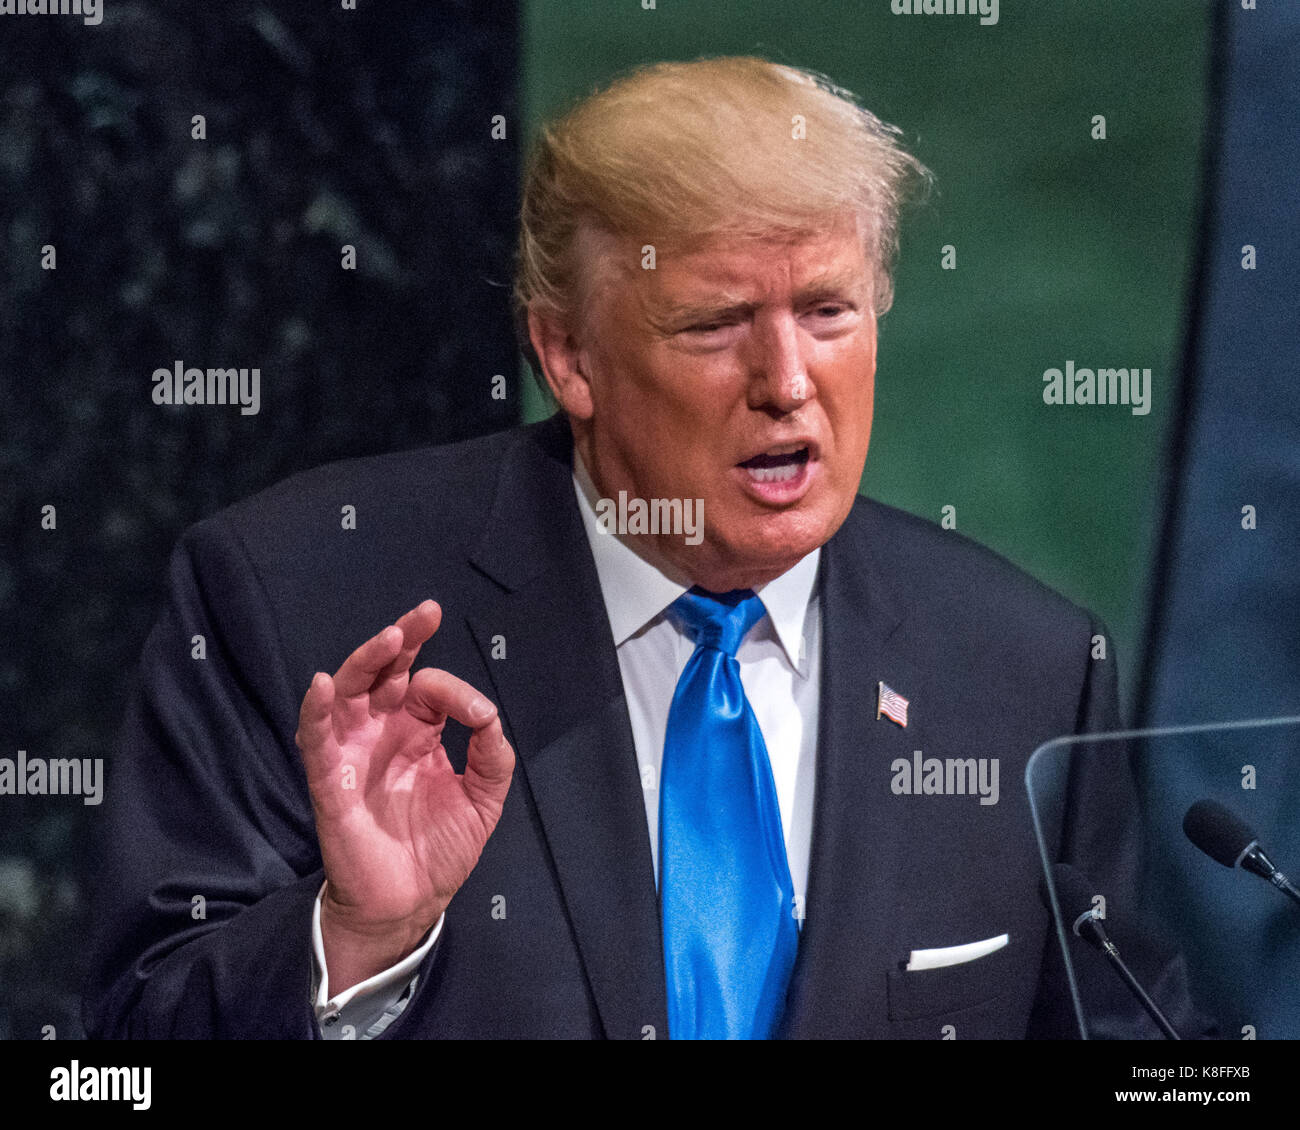 New York, USA, 19 September, 2017.  United States President Donald Trump addresses the opening session of the 72st United Nations General Assembly in New York on September 17, 2017. Trump used his first ever address to the U.N. General Assembly to condemn North Korea and Iran. Enrique Shore/Alamy Live News Stock Photo